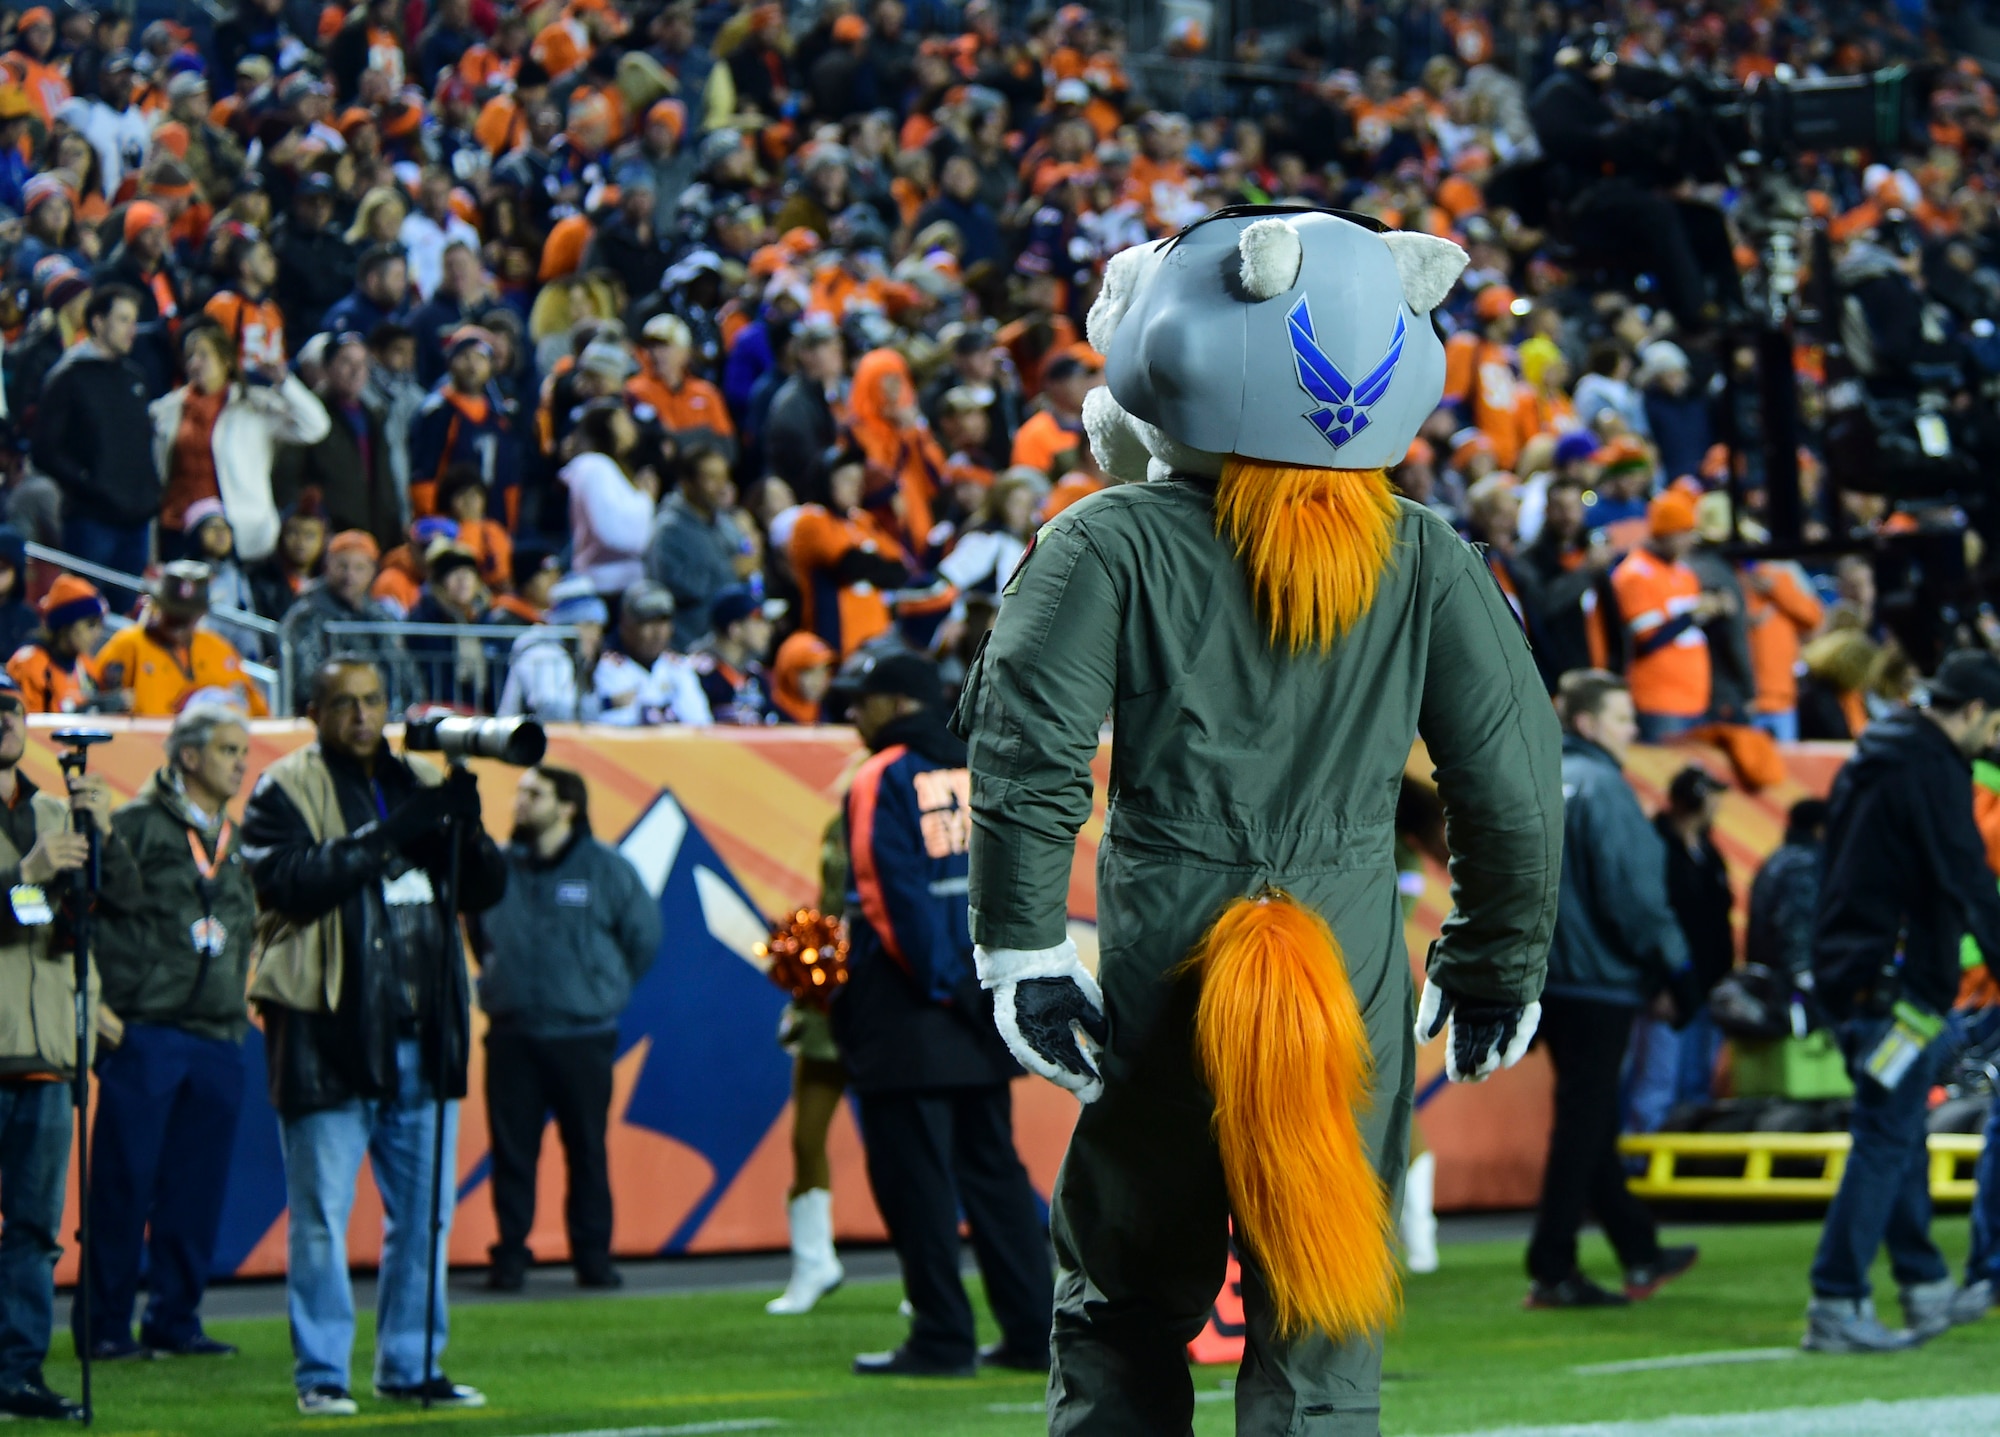 Miles, the Denver Broncos’ mascot, pumps up the crowd in his Air Force flight suit during the a Salute to Service game Nov. 12, 2017, at Sports Authority Stadium at Mile High in Denver.